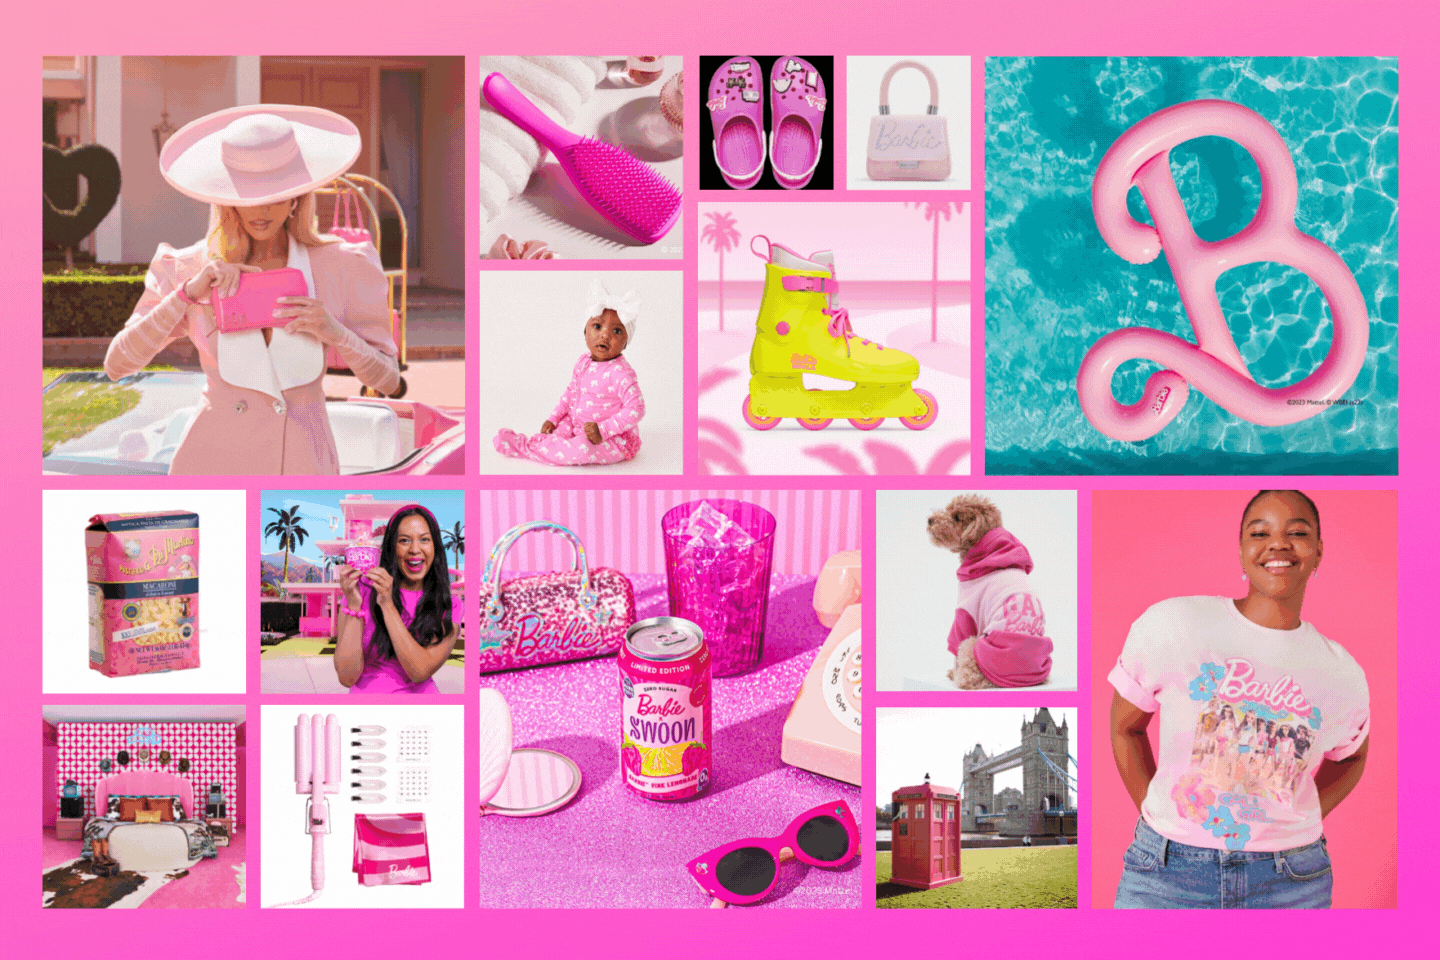 Lespion Sisoring Forsed Videos - All the Barbie Partnerships, From Crocs to Burger King | Time